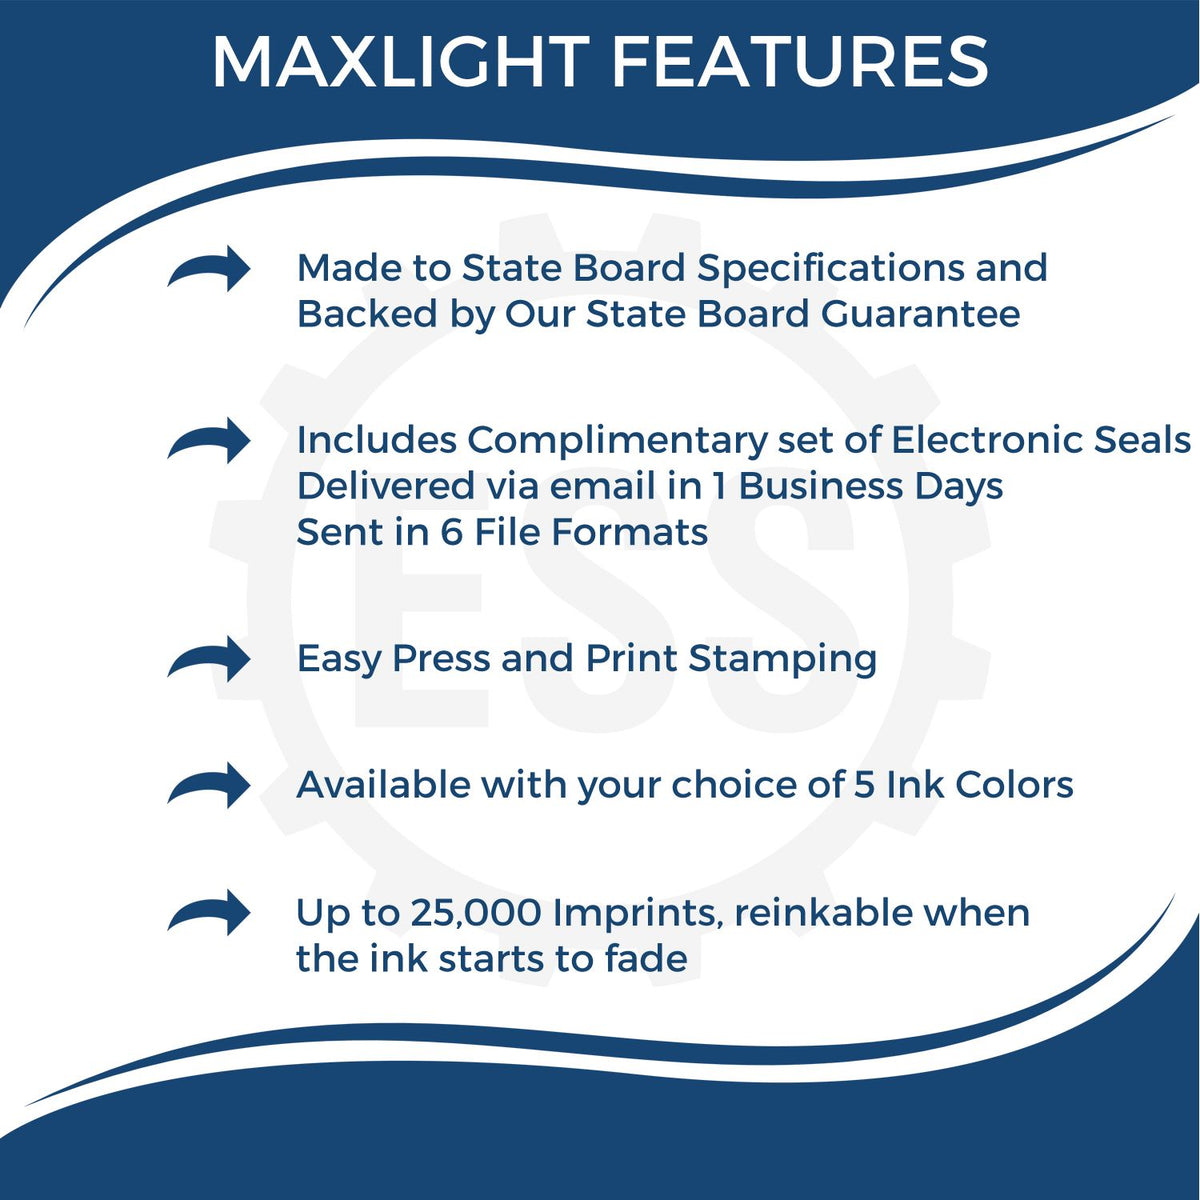 A picture of an infographic highlighting the selling points for the Premium MaxLight Pre-Inked Montana Landscape Architectural Stamp